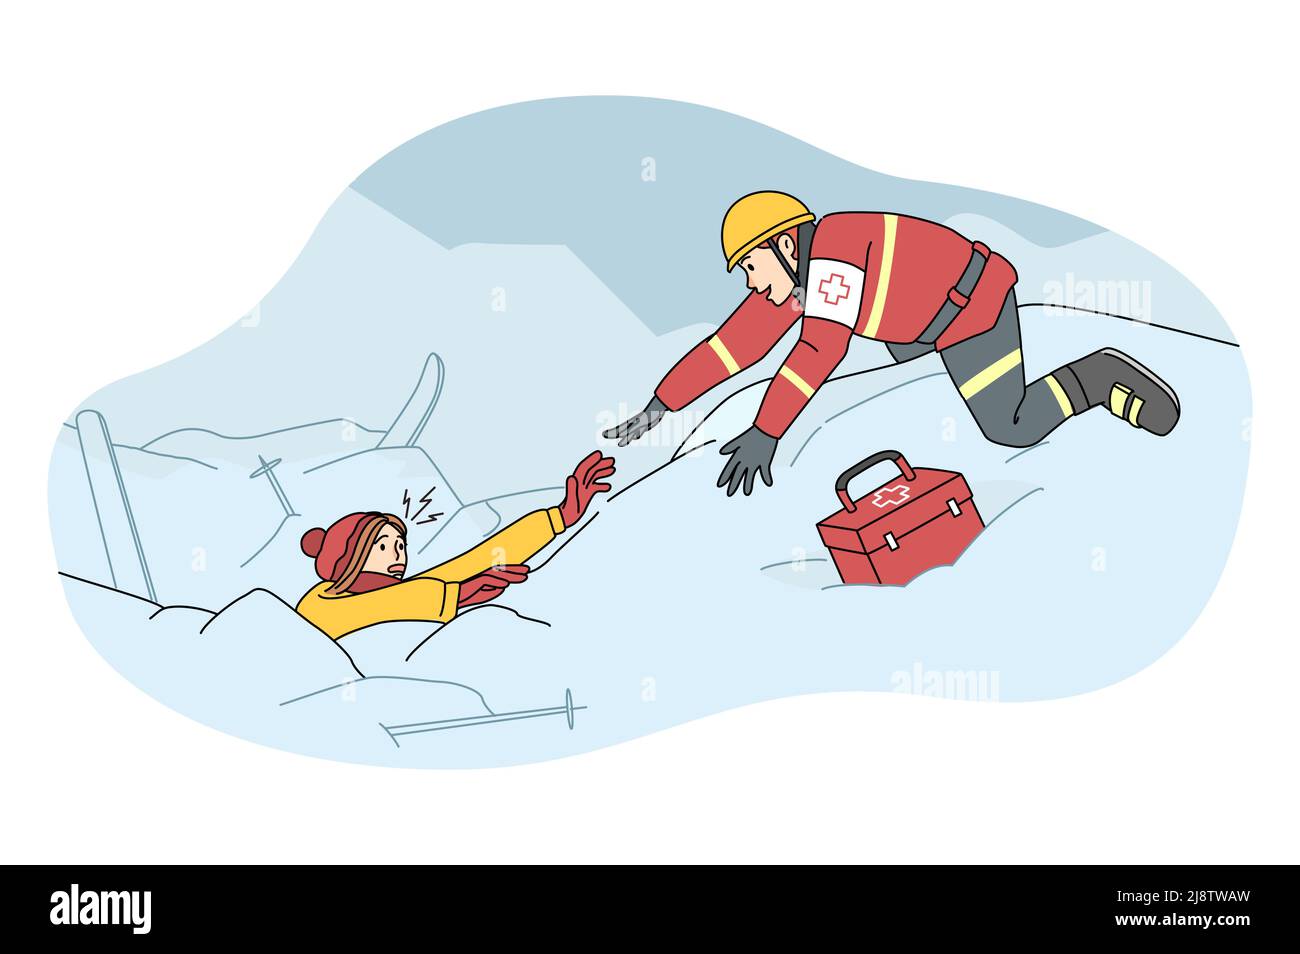 Lifesaver helping skier buried in avalanche after severe snowstorm. Rescuer find people in snow at ski resort. Lifesaving and rescuing operation. Flat vector illustration.  Stock Vector